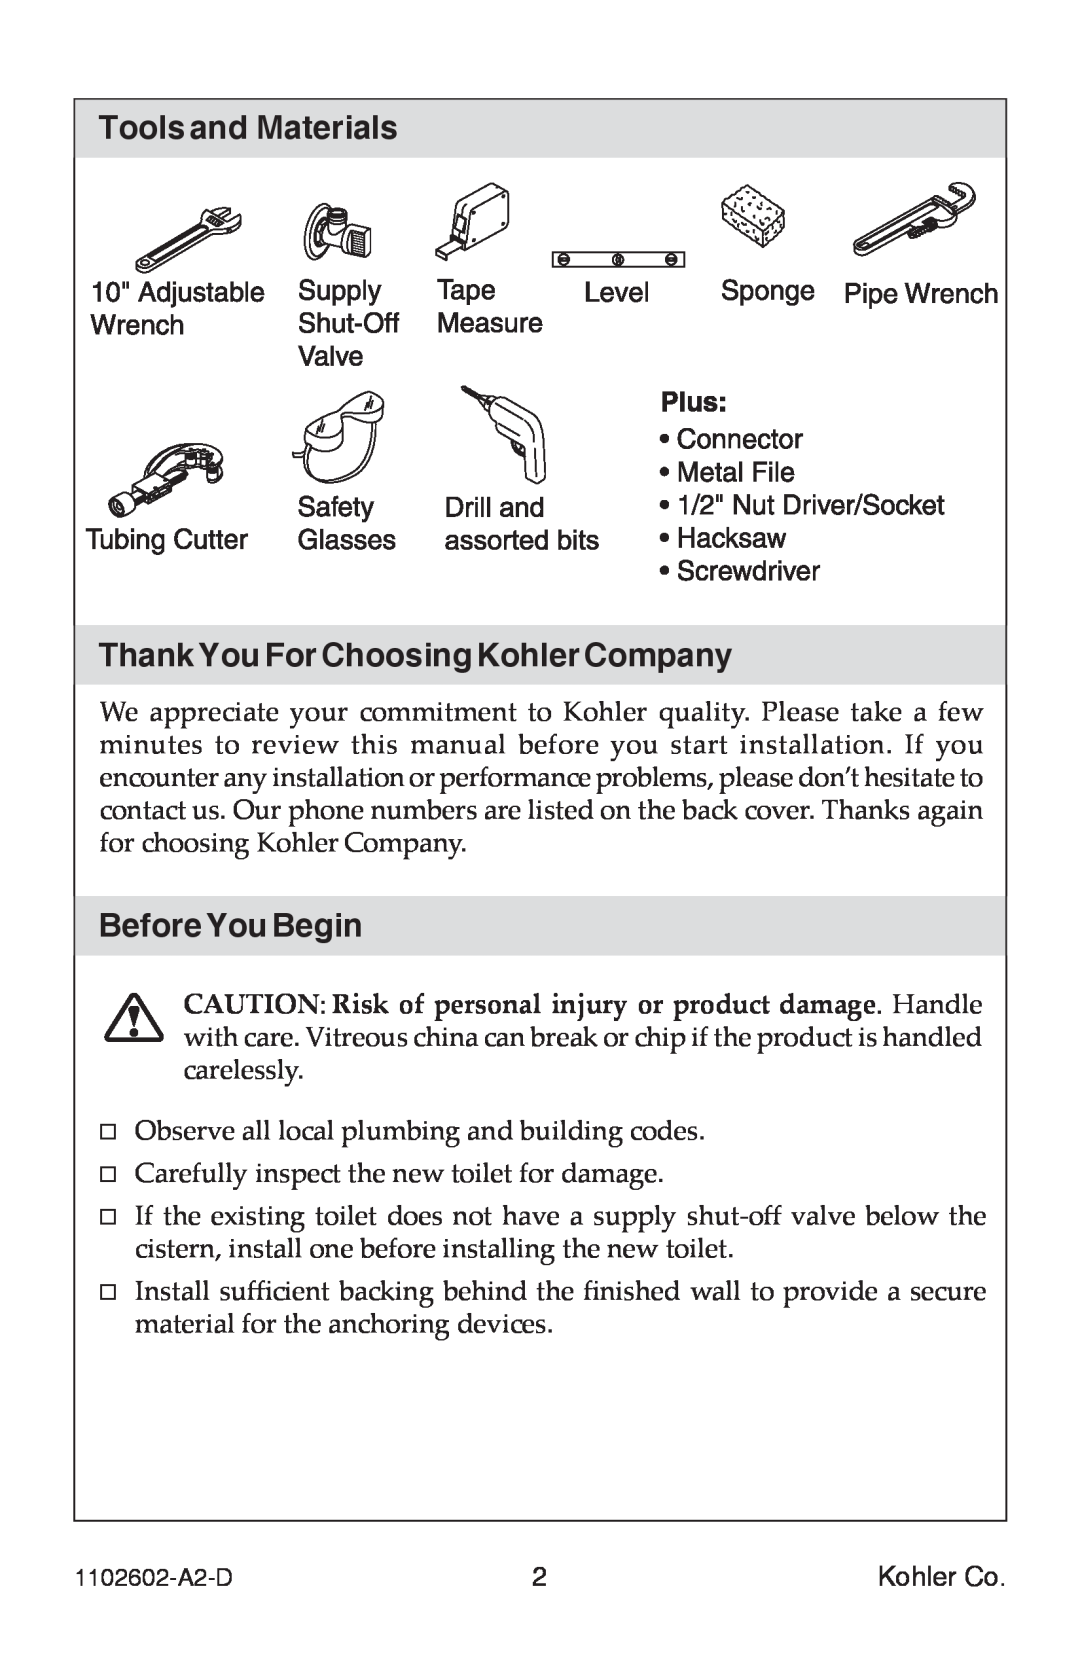 Kohler 1102602-A2-D manual Tools and Materials, Thank You For Choosing Kohler Company, Before You Begin 